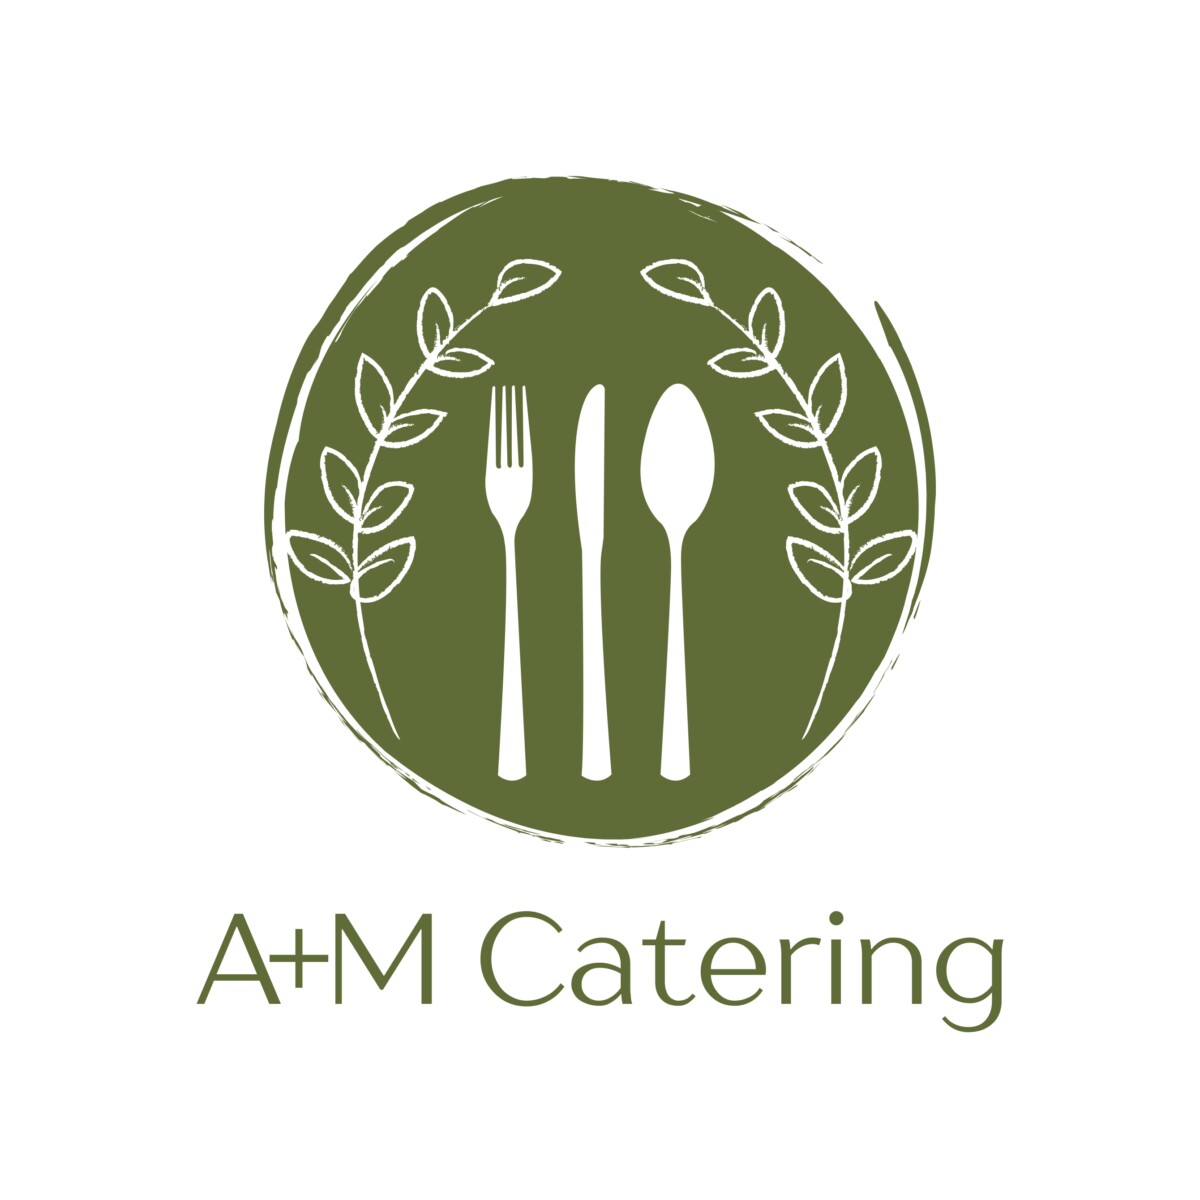 A+M Catering logo